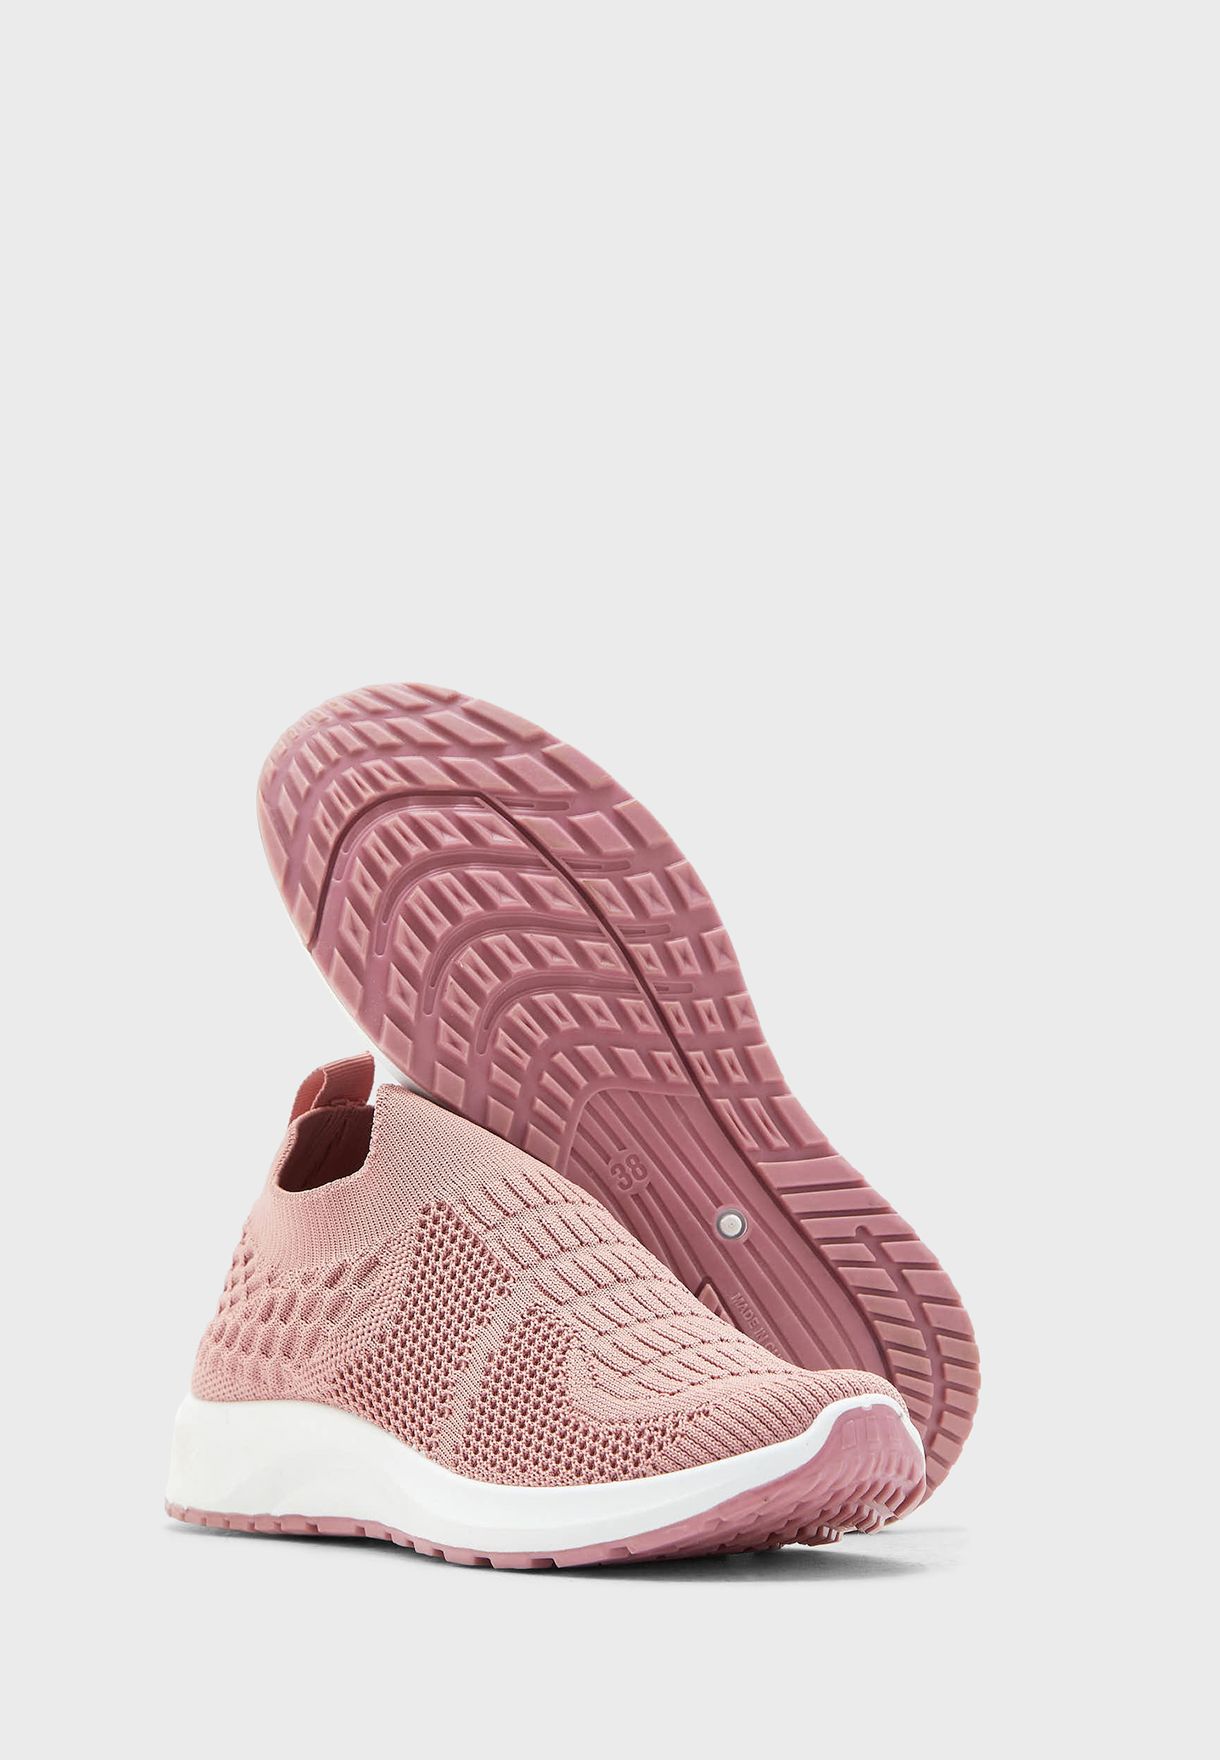 Coloured Sole Pull On Knit Sneaker